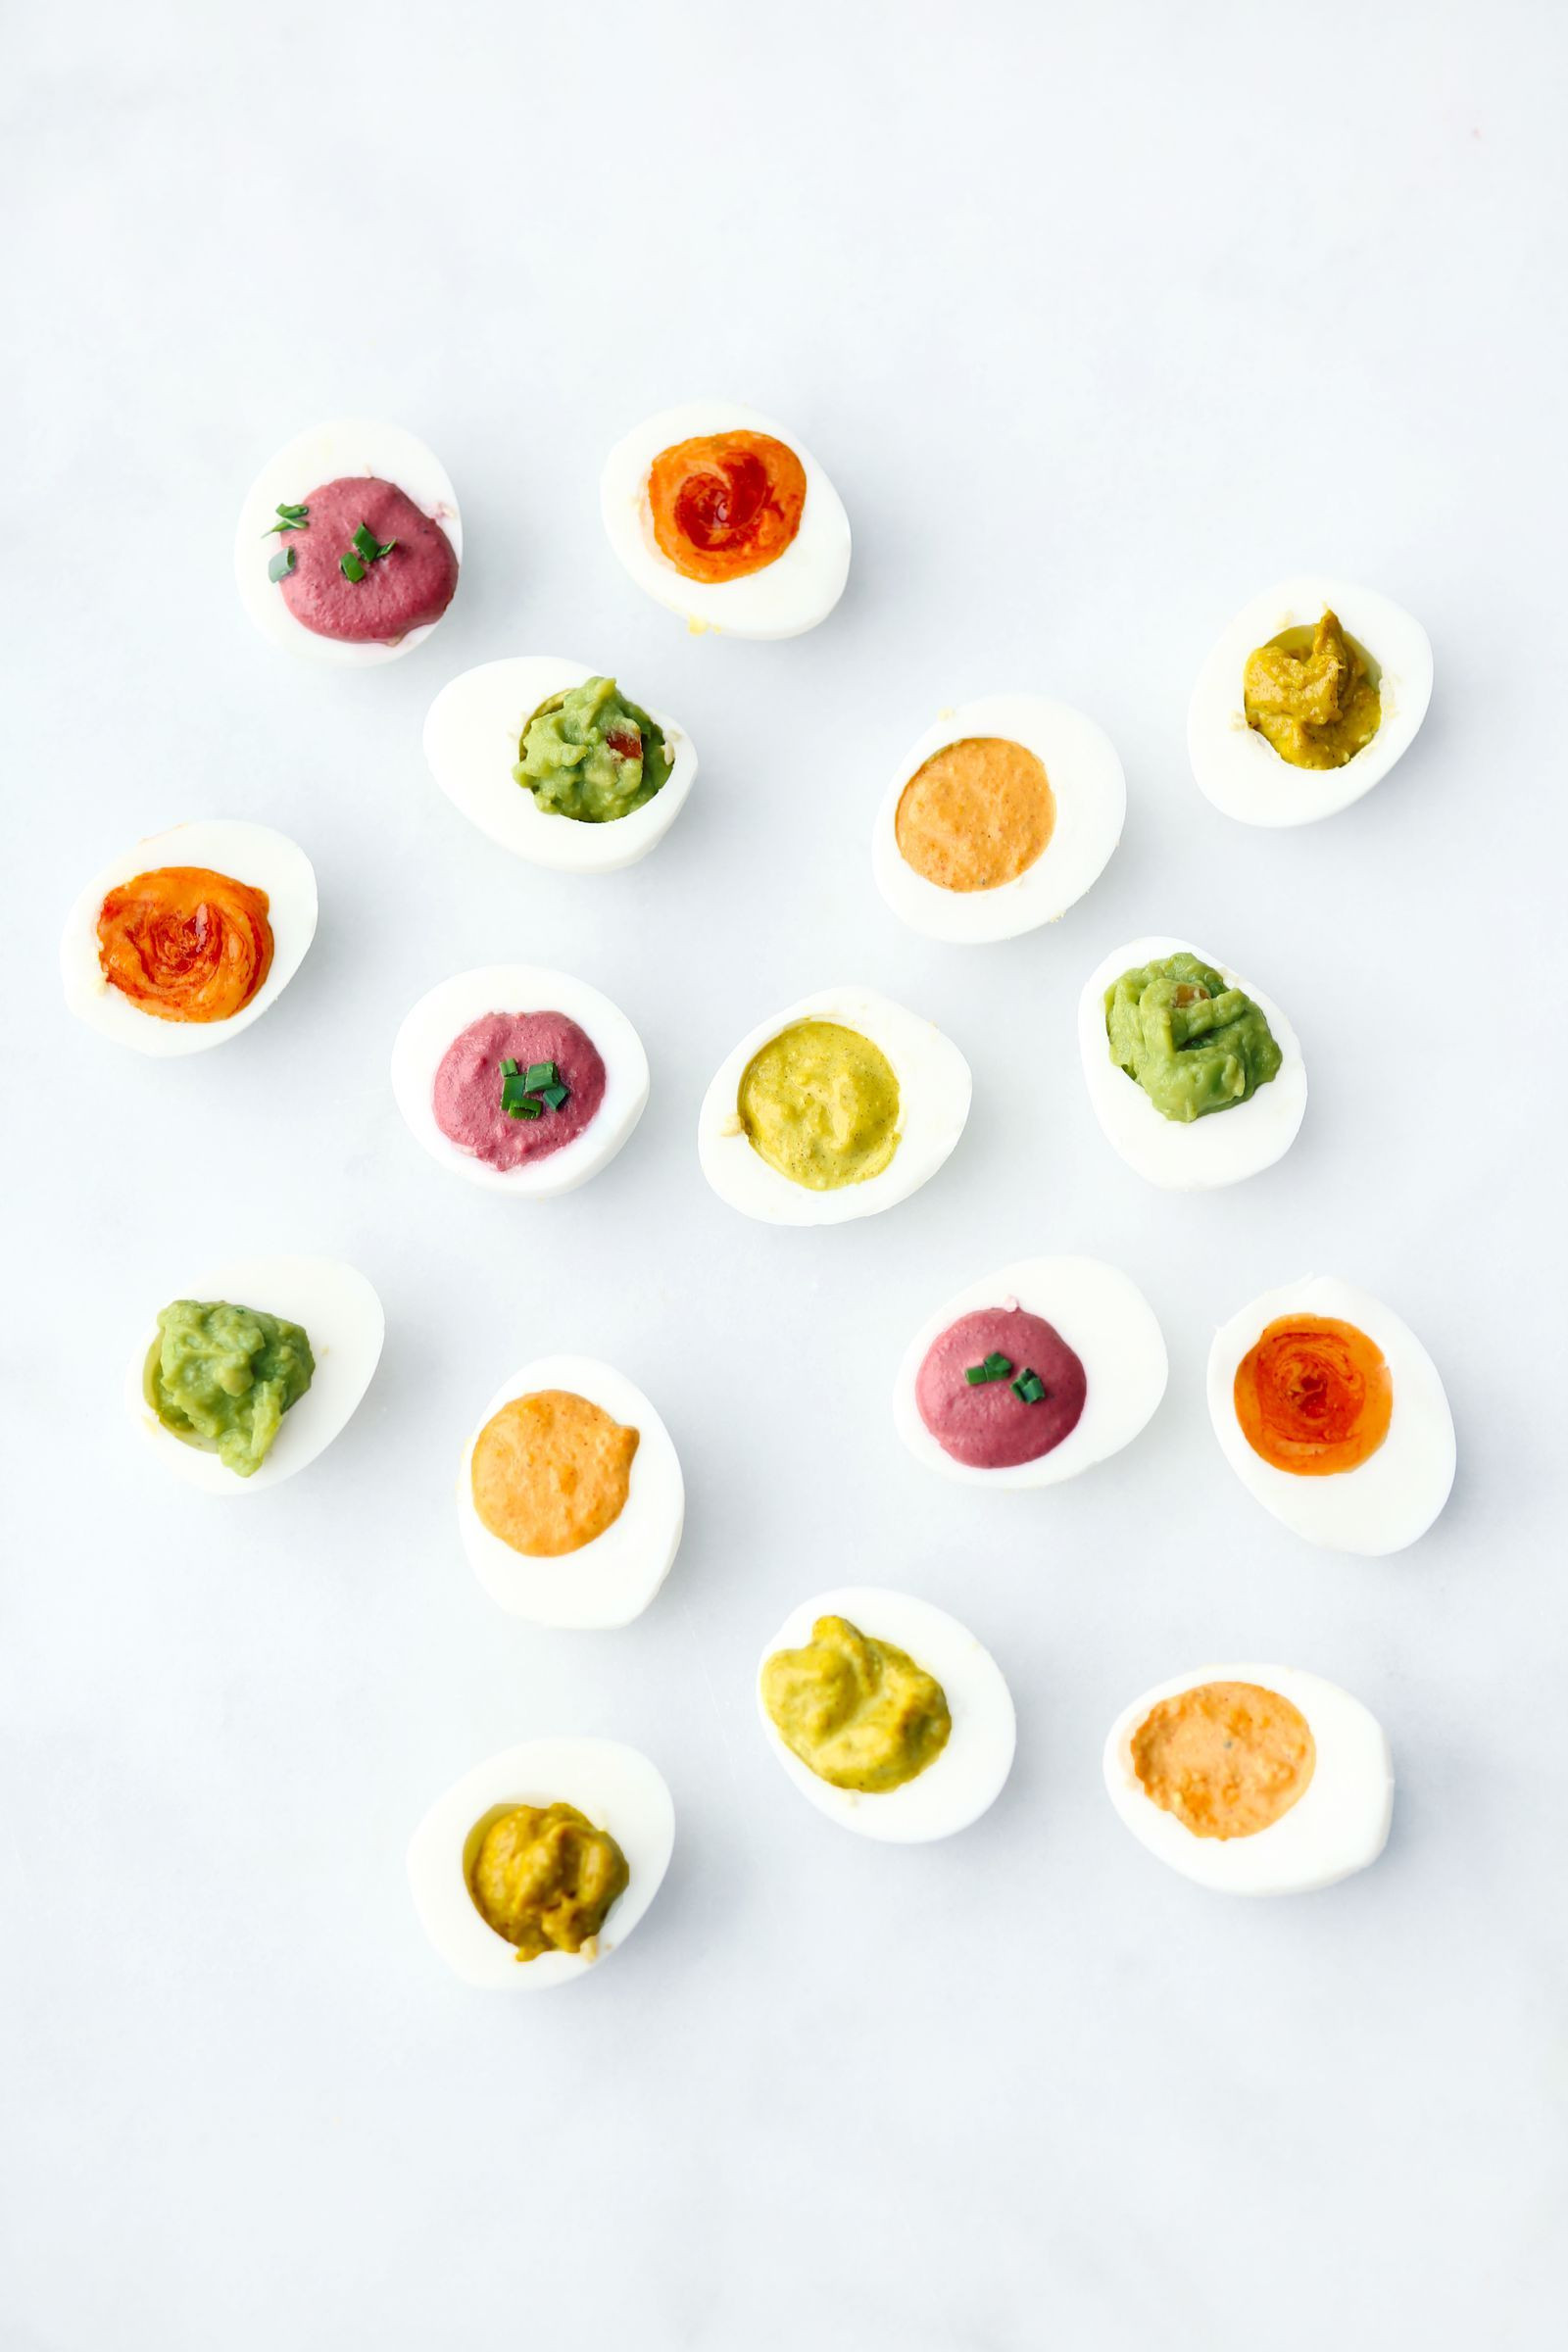 Best Way To Boil Eggs For Deviled Eggs
 Add These Rainbow Deviled Eggs to Your Easter Table